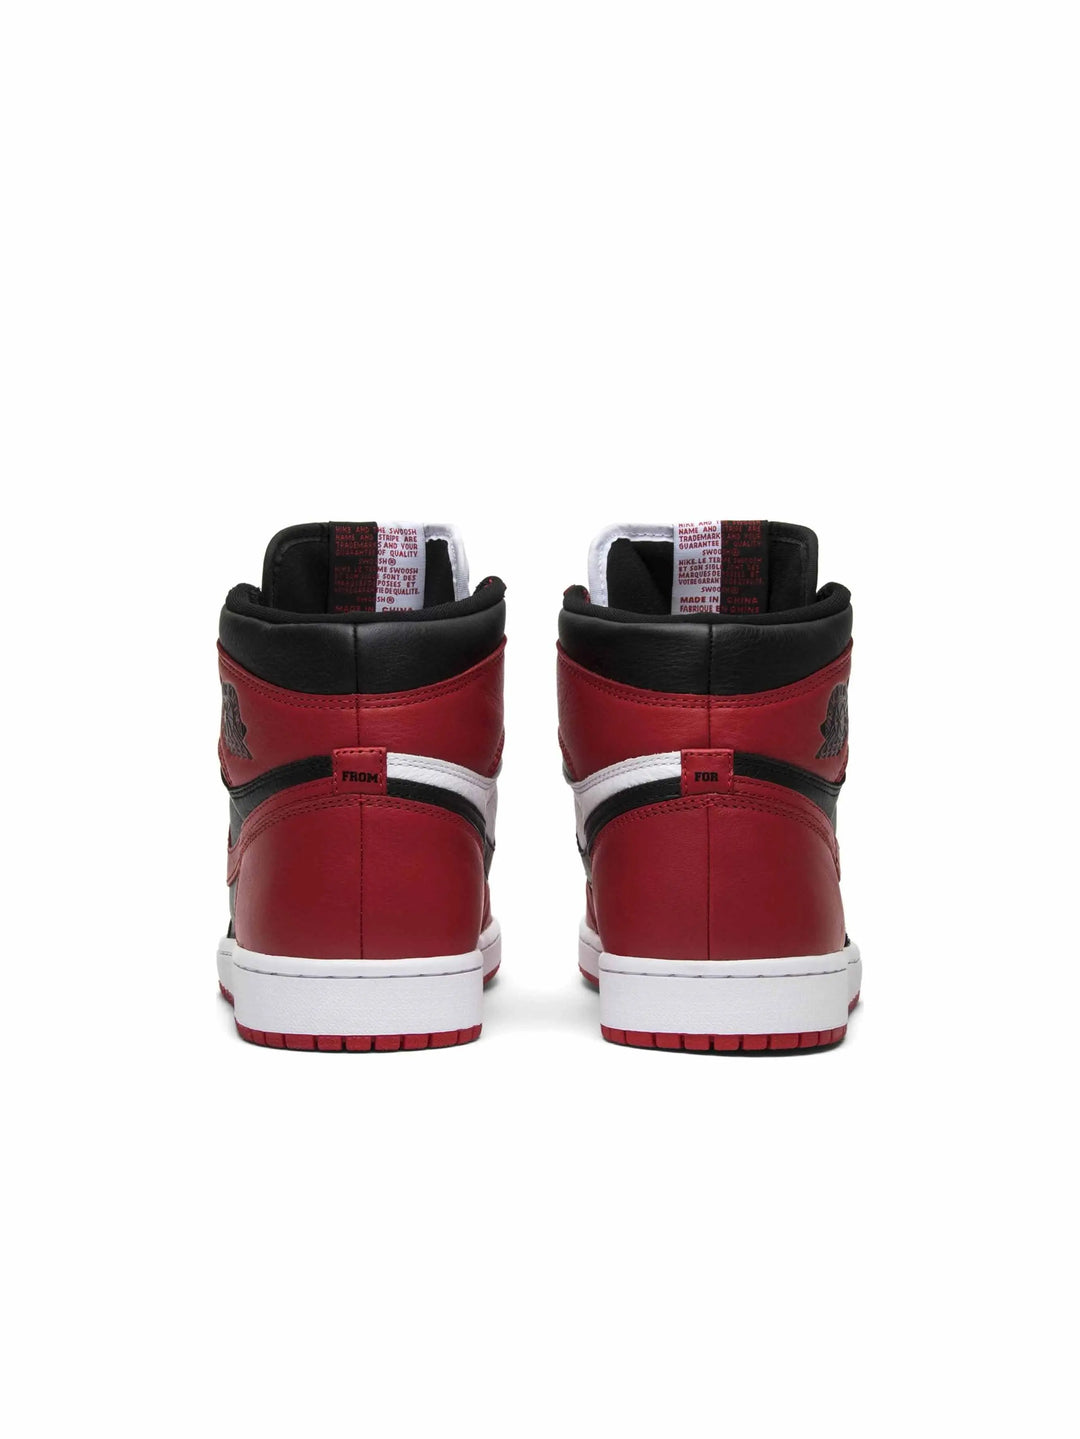 Nike Air Jordan 1 Retro High Homage To Home Chicago (Numbered) in Melbourne, Australia - Prior